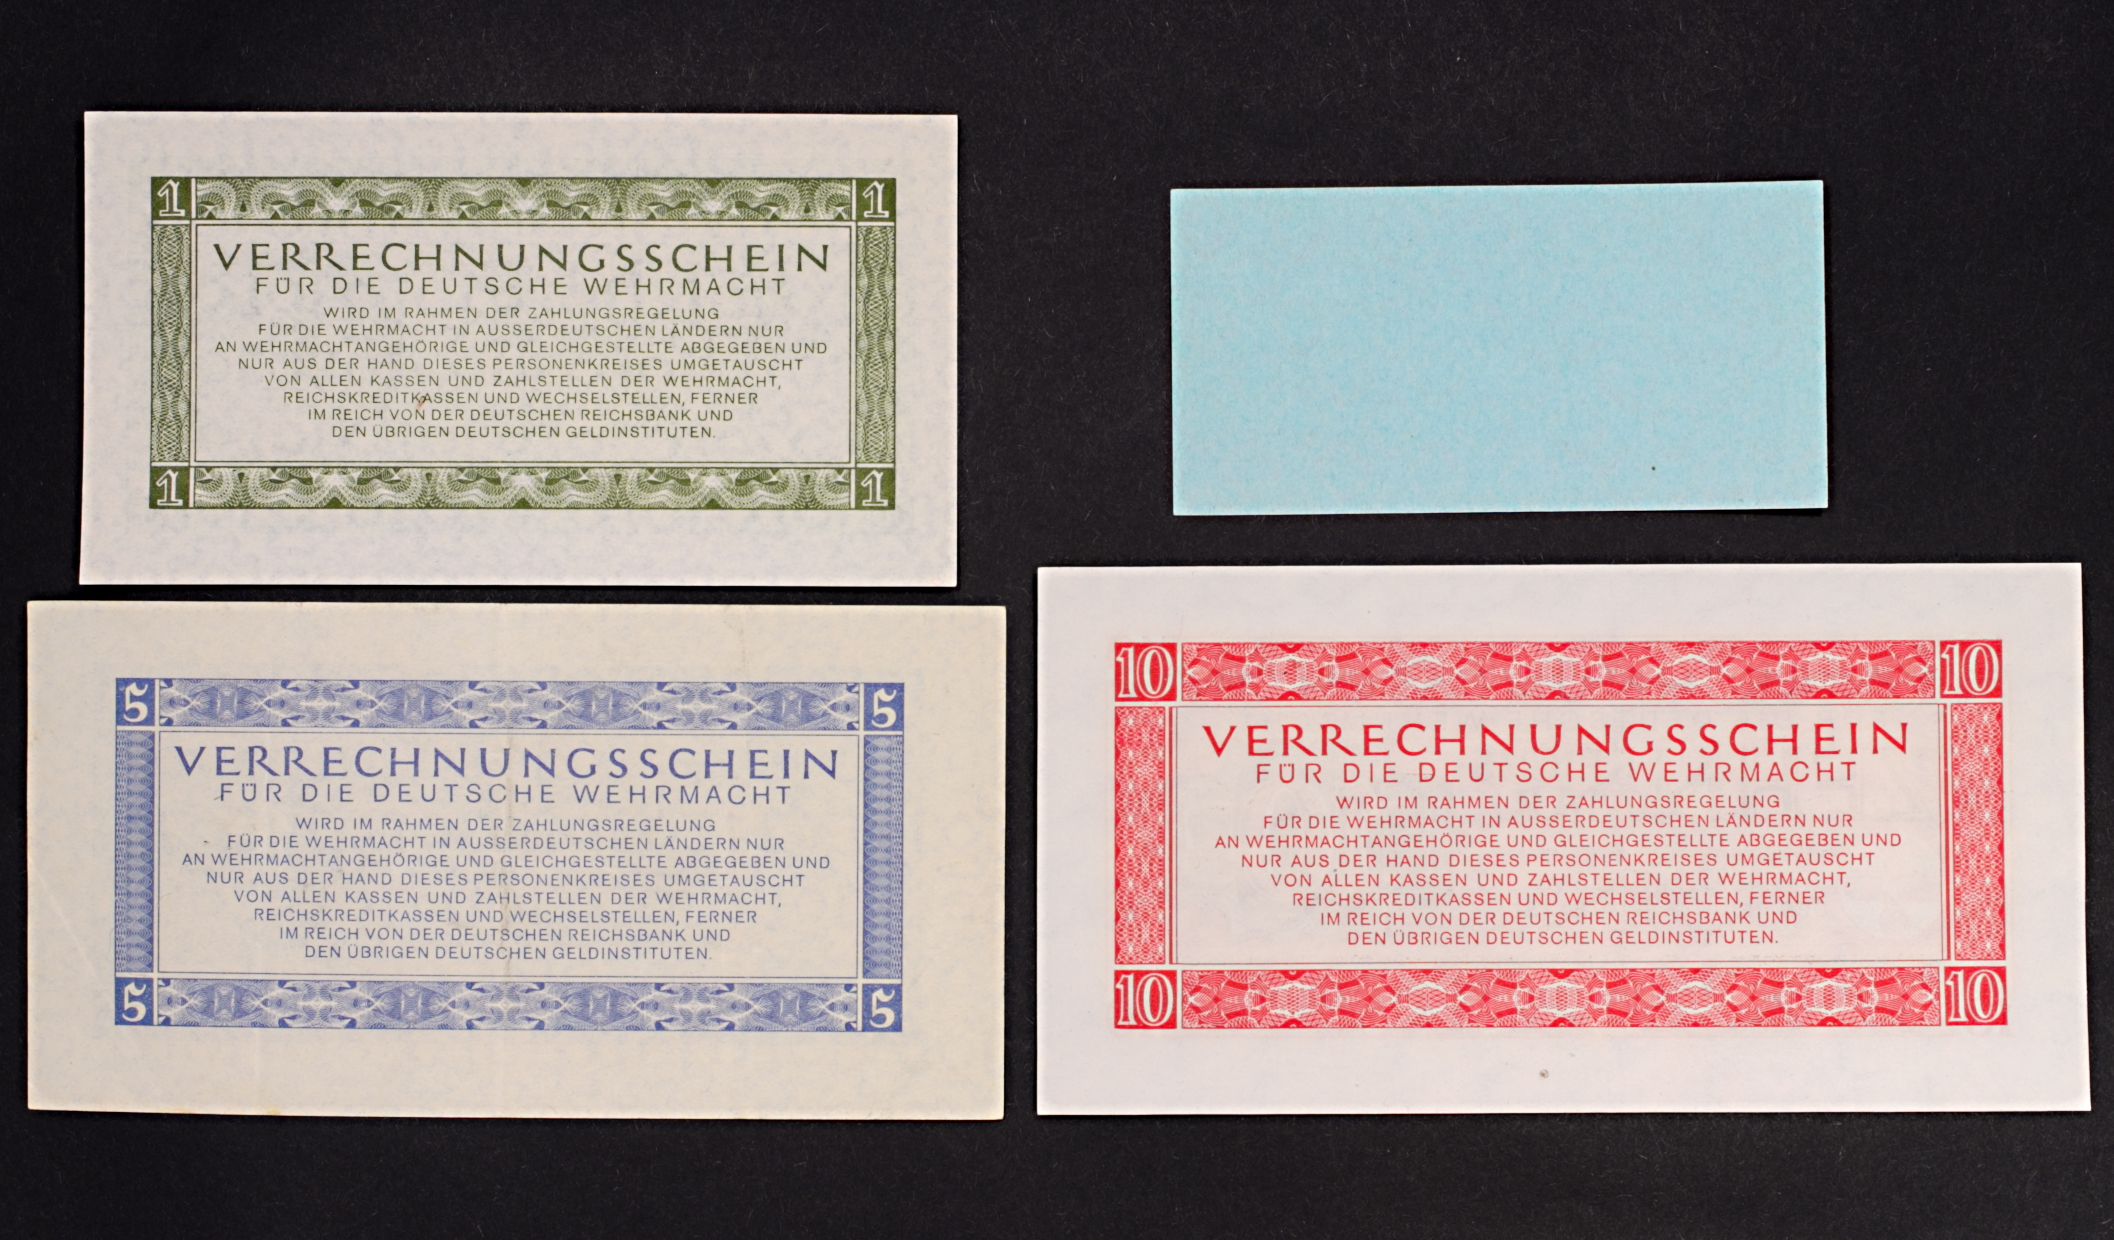 Germany - WW2 Wehrmacht, German Armed Forces, 1944, 1 Pfennig, 1, 5 and 10 Reichsmark, High grades - Image 2 of 2